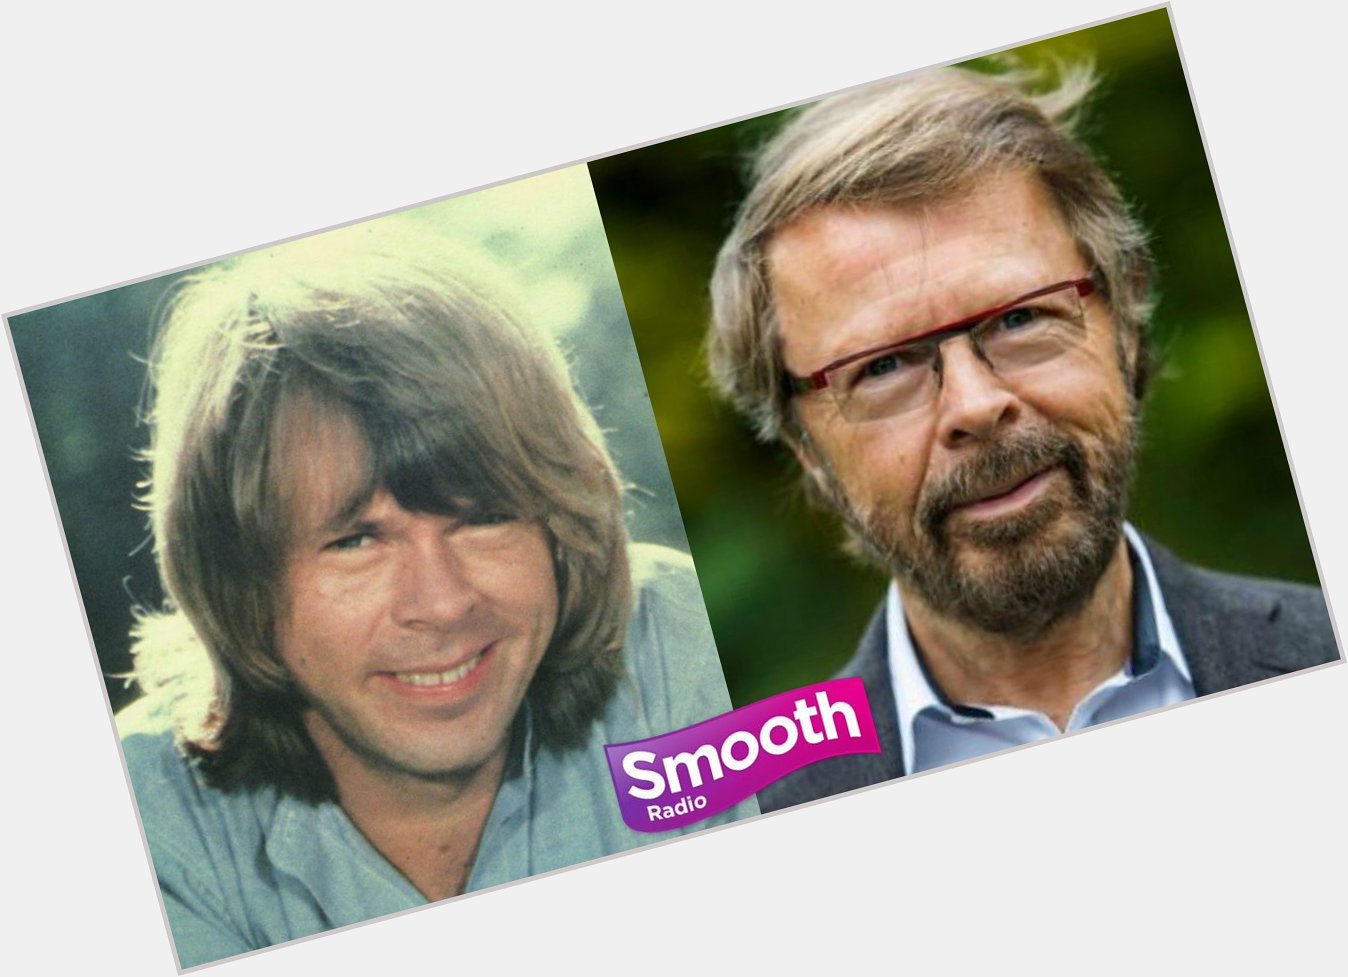 Happy 73rd birthday ABBA legend Bjorn Ulvaeus! Getting better with age it seems... 